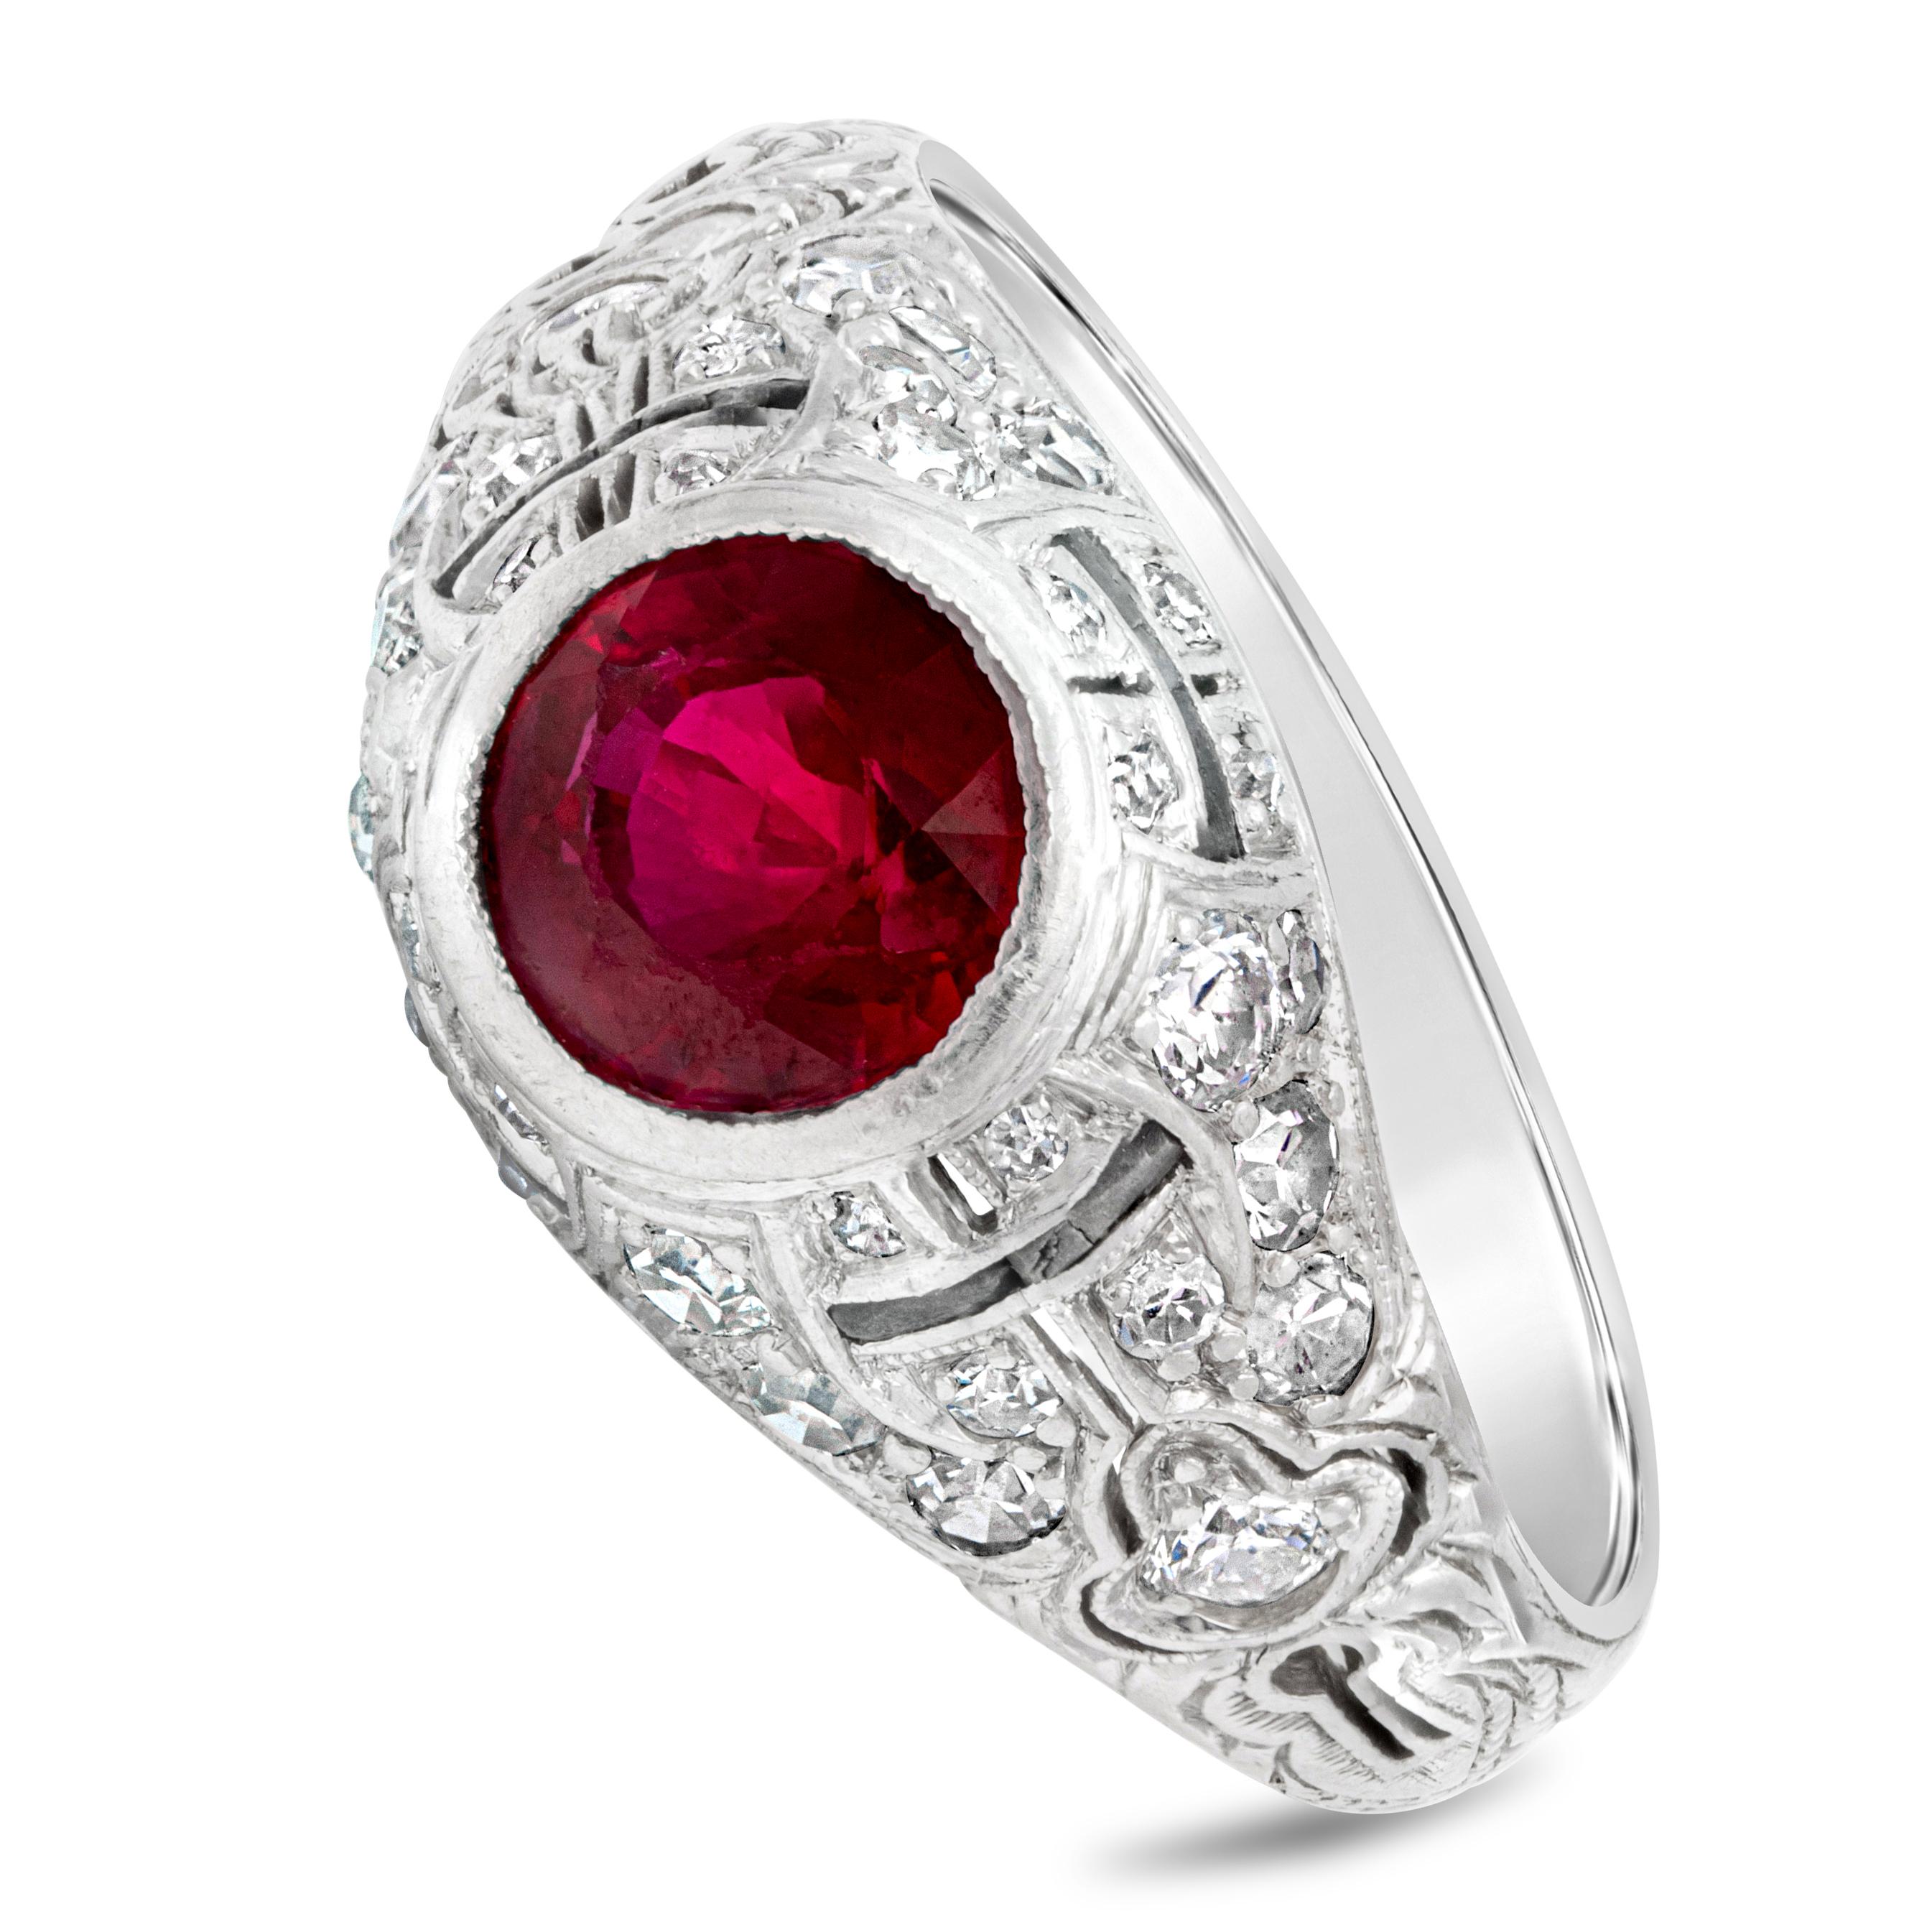 An antique piece of jewelry, showcasing a color-rich 1.60 carats of round ruby certified by GIA and set beautifully in a bezel. Flanked by round diamonds all around weighing 1.00 carat total. Made with platinum. Size 8 US, resizable upon request.

